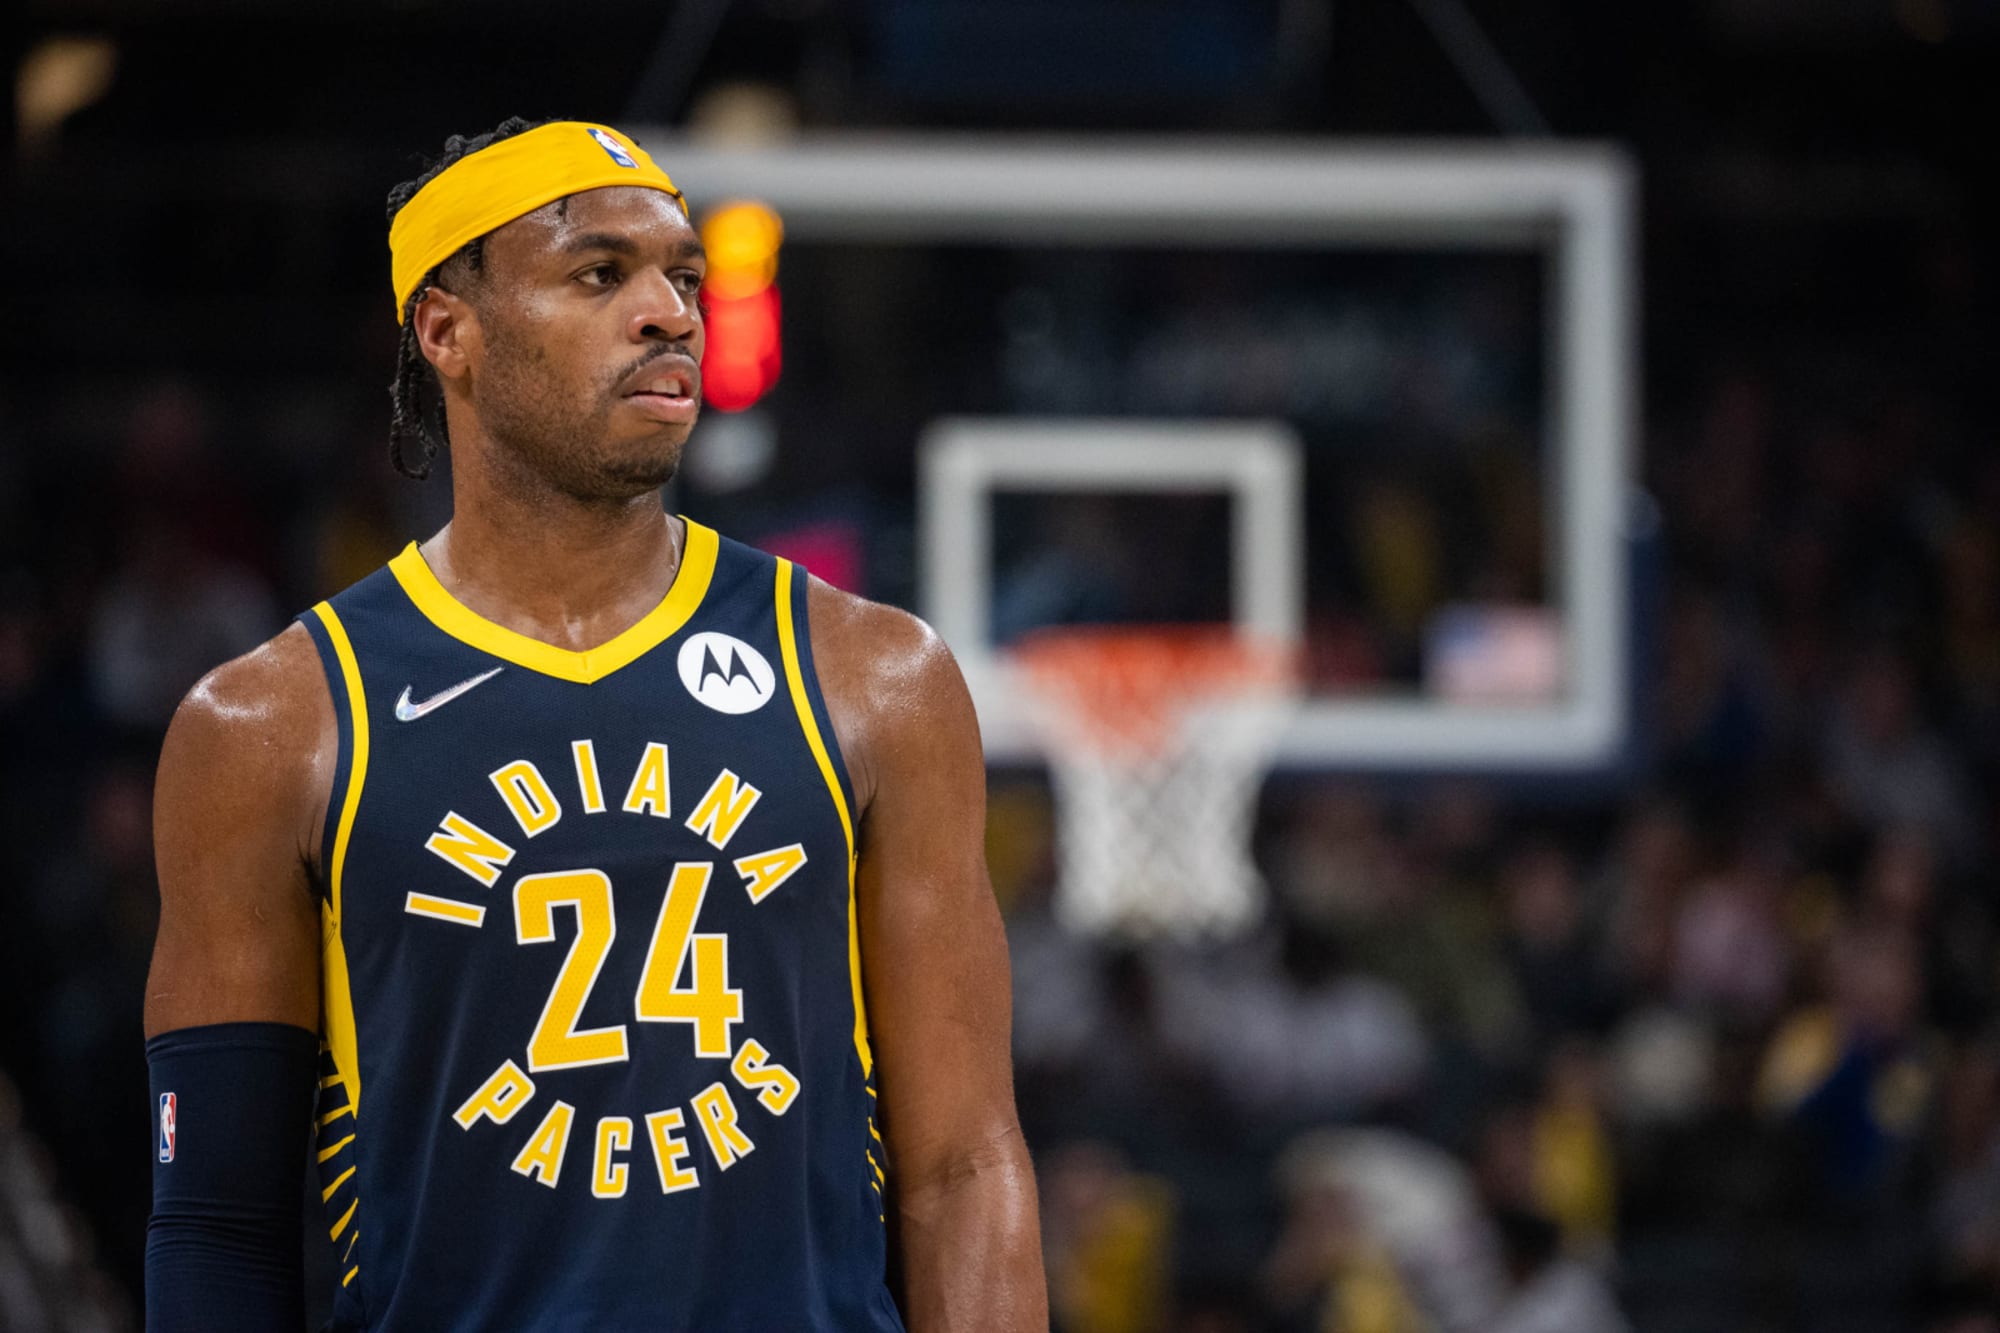 Indiana Pacers: Buddy Hield will be a prized asset in the foreseeable future